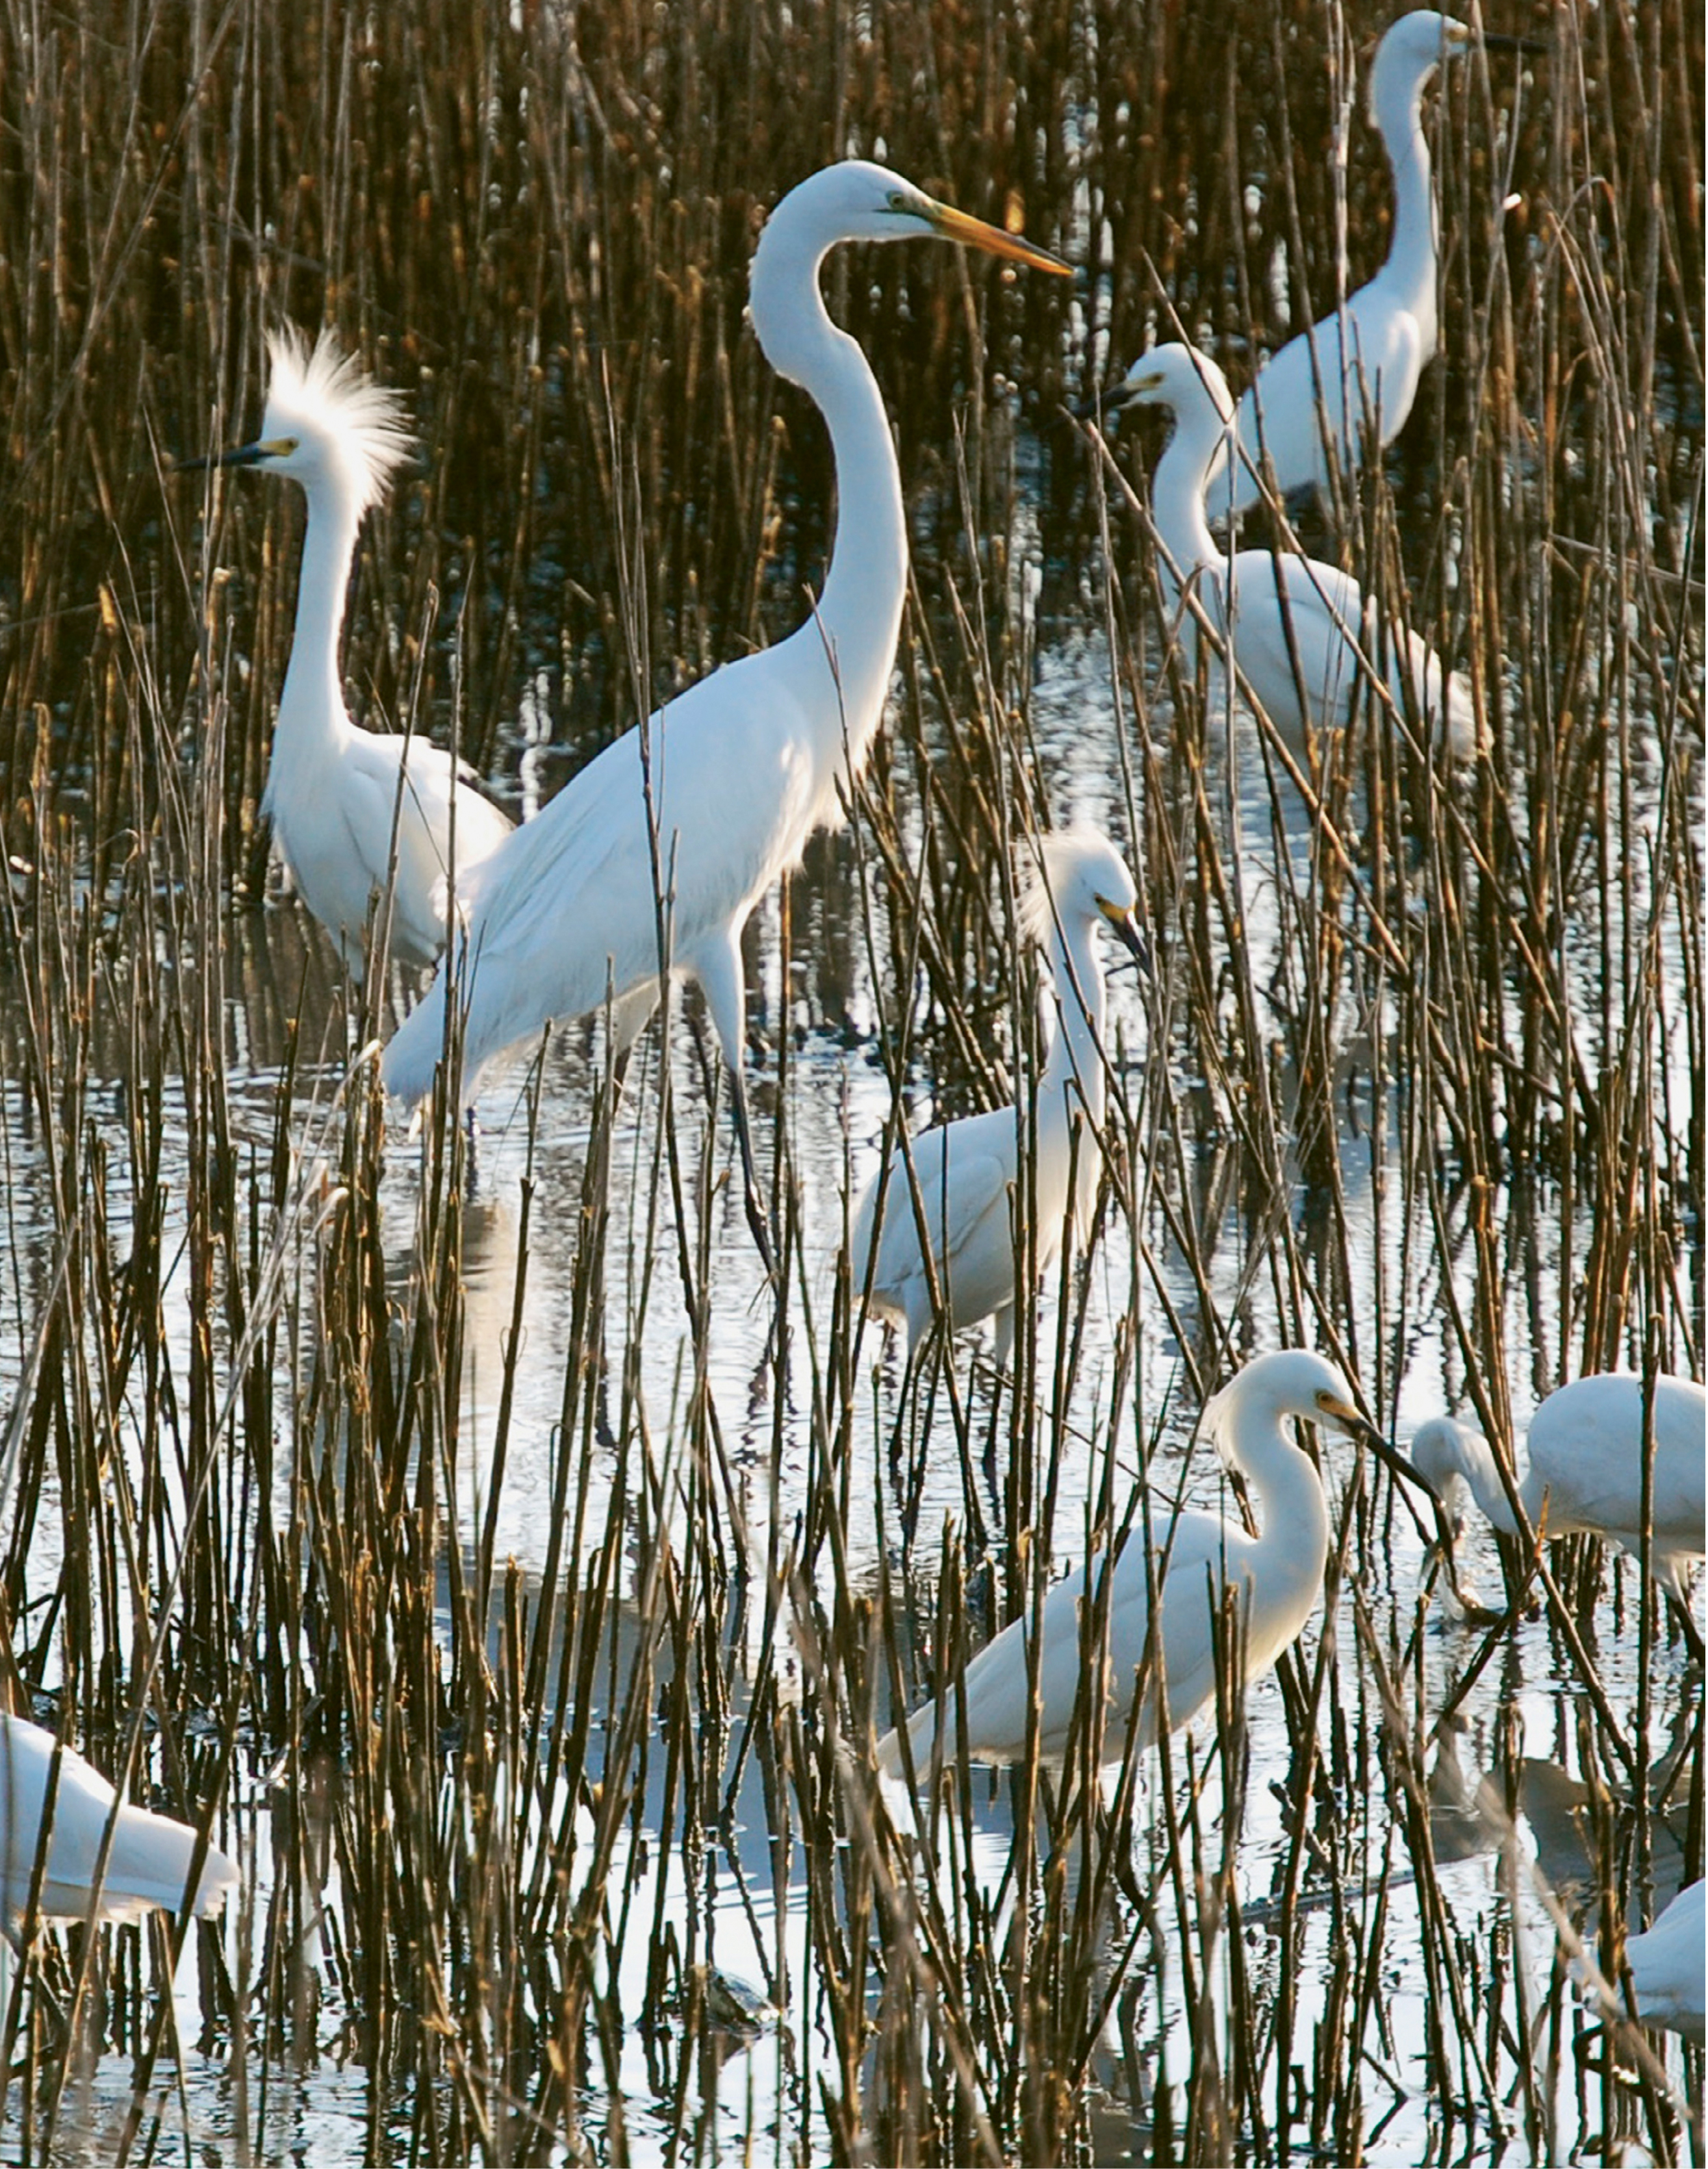 Breakfast Meeting by Hilarie Lambert  {Amateur category} - Hungry egrets in the marsh near the James Island Yacht Club